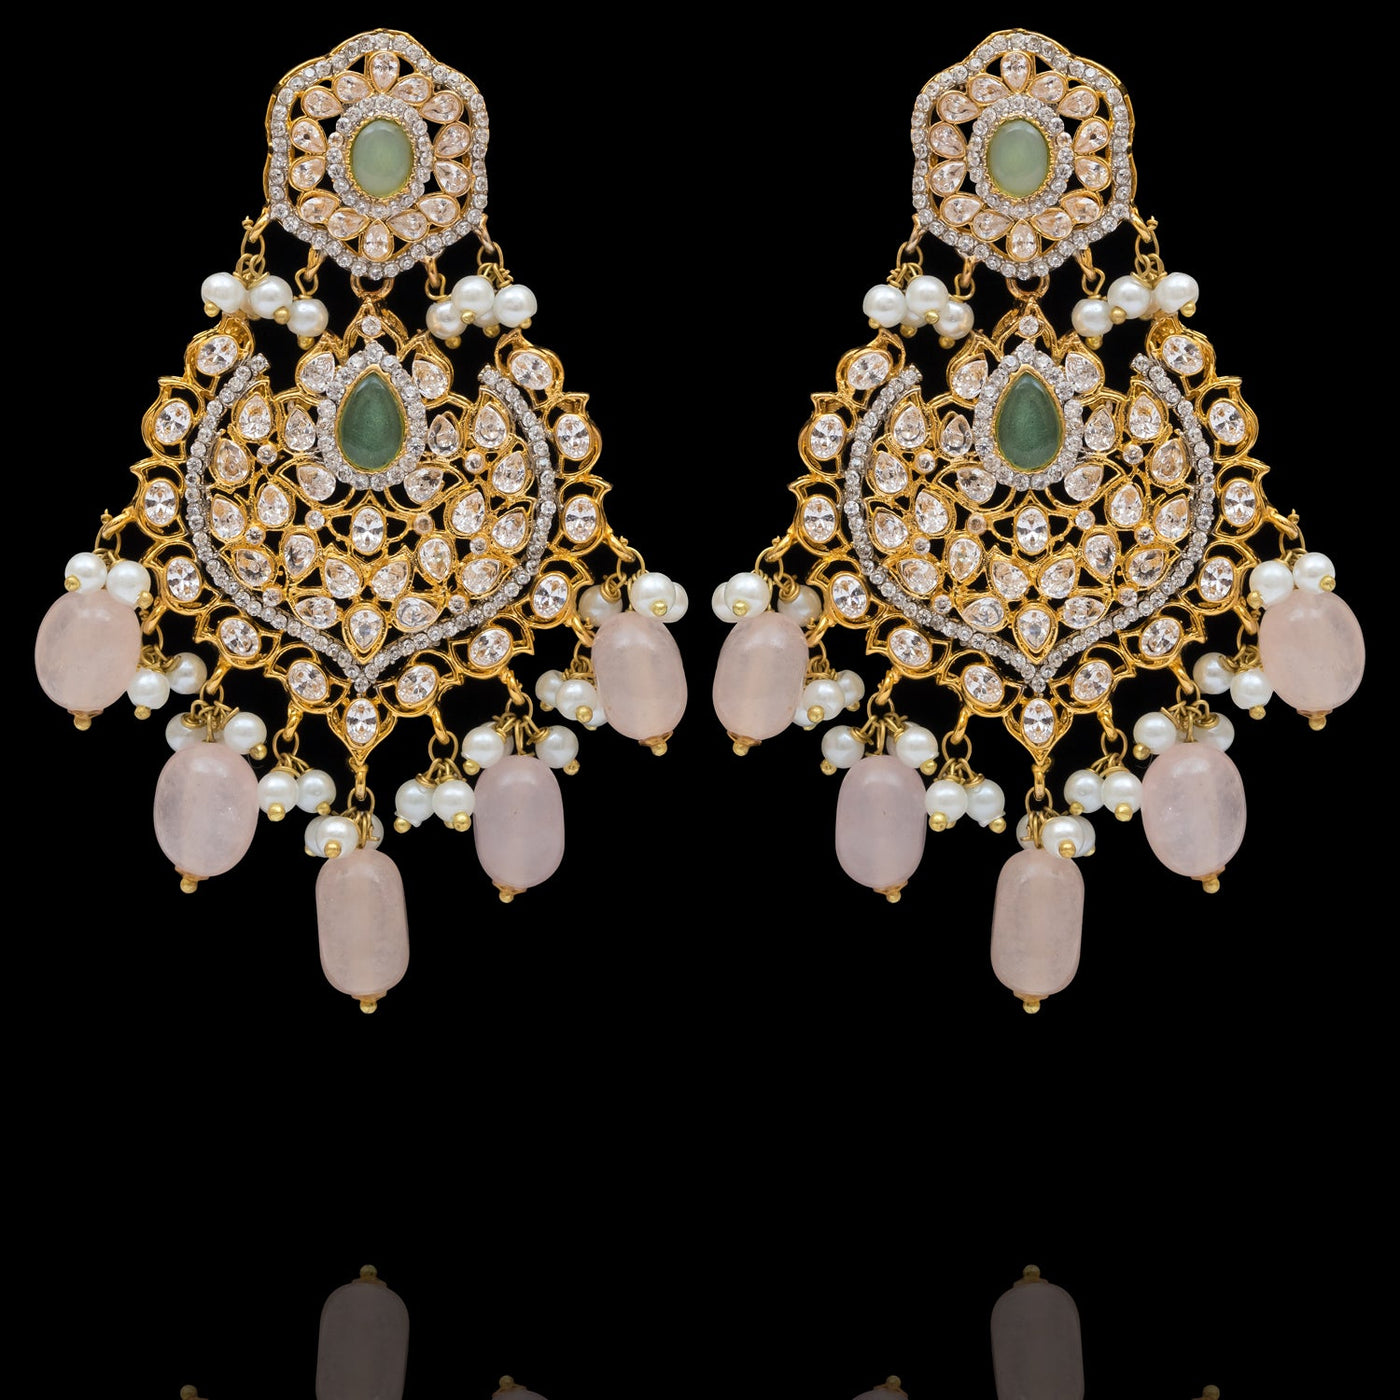 Esha Earrings - Available in 2 Colors